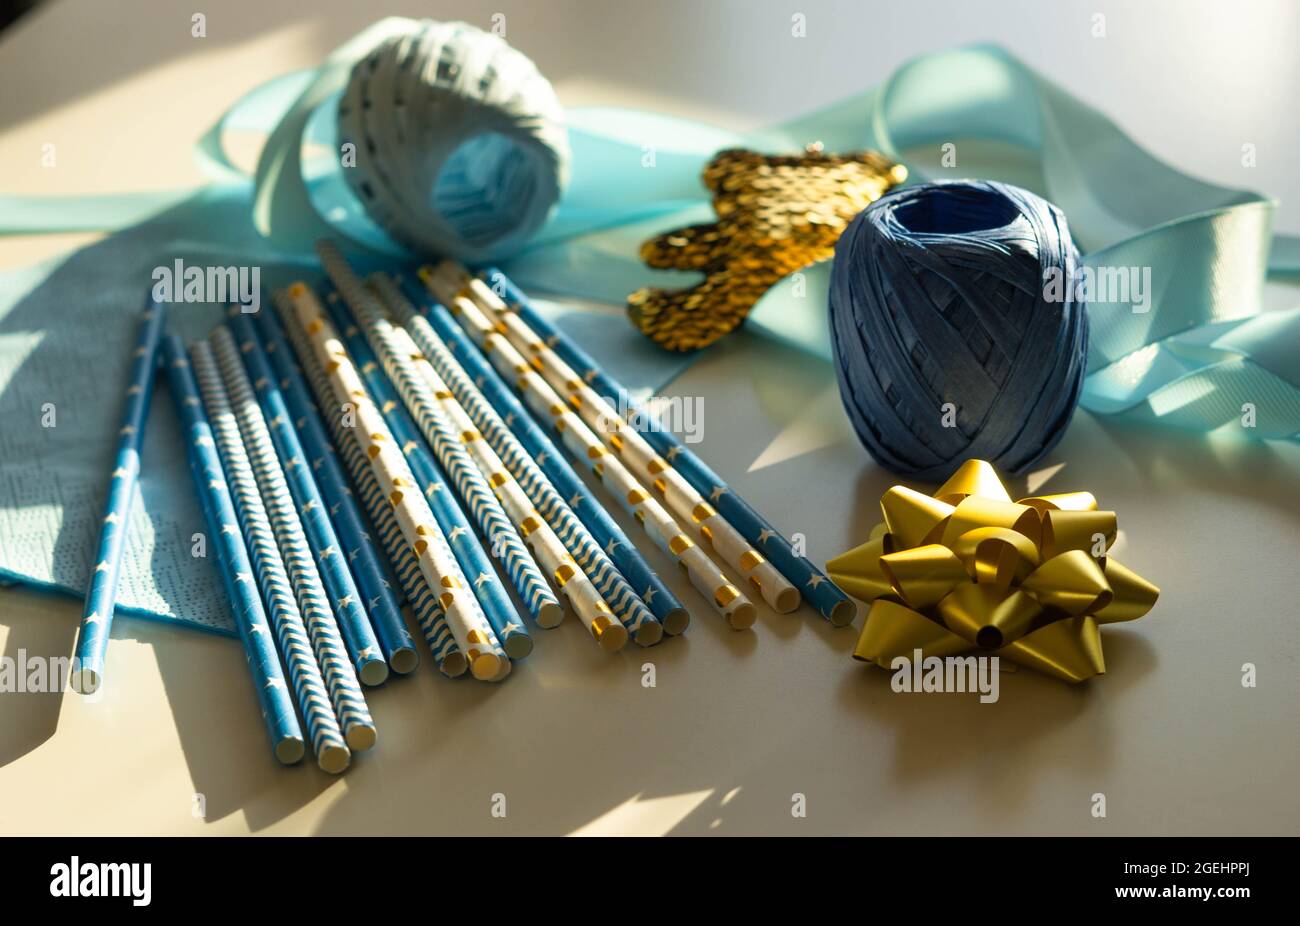 Baby showers decor. Blue and golden color concept for gender reveal party, newborn baby, boy's birthday. Stock Photo